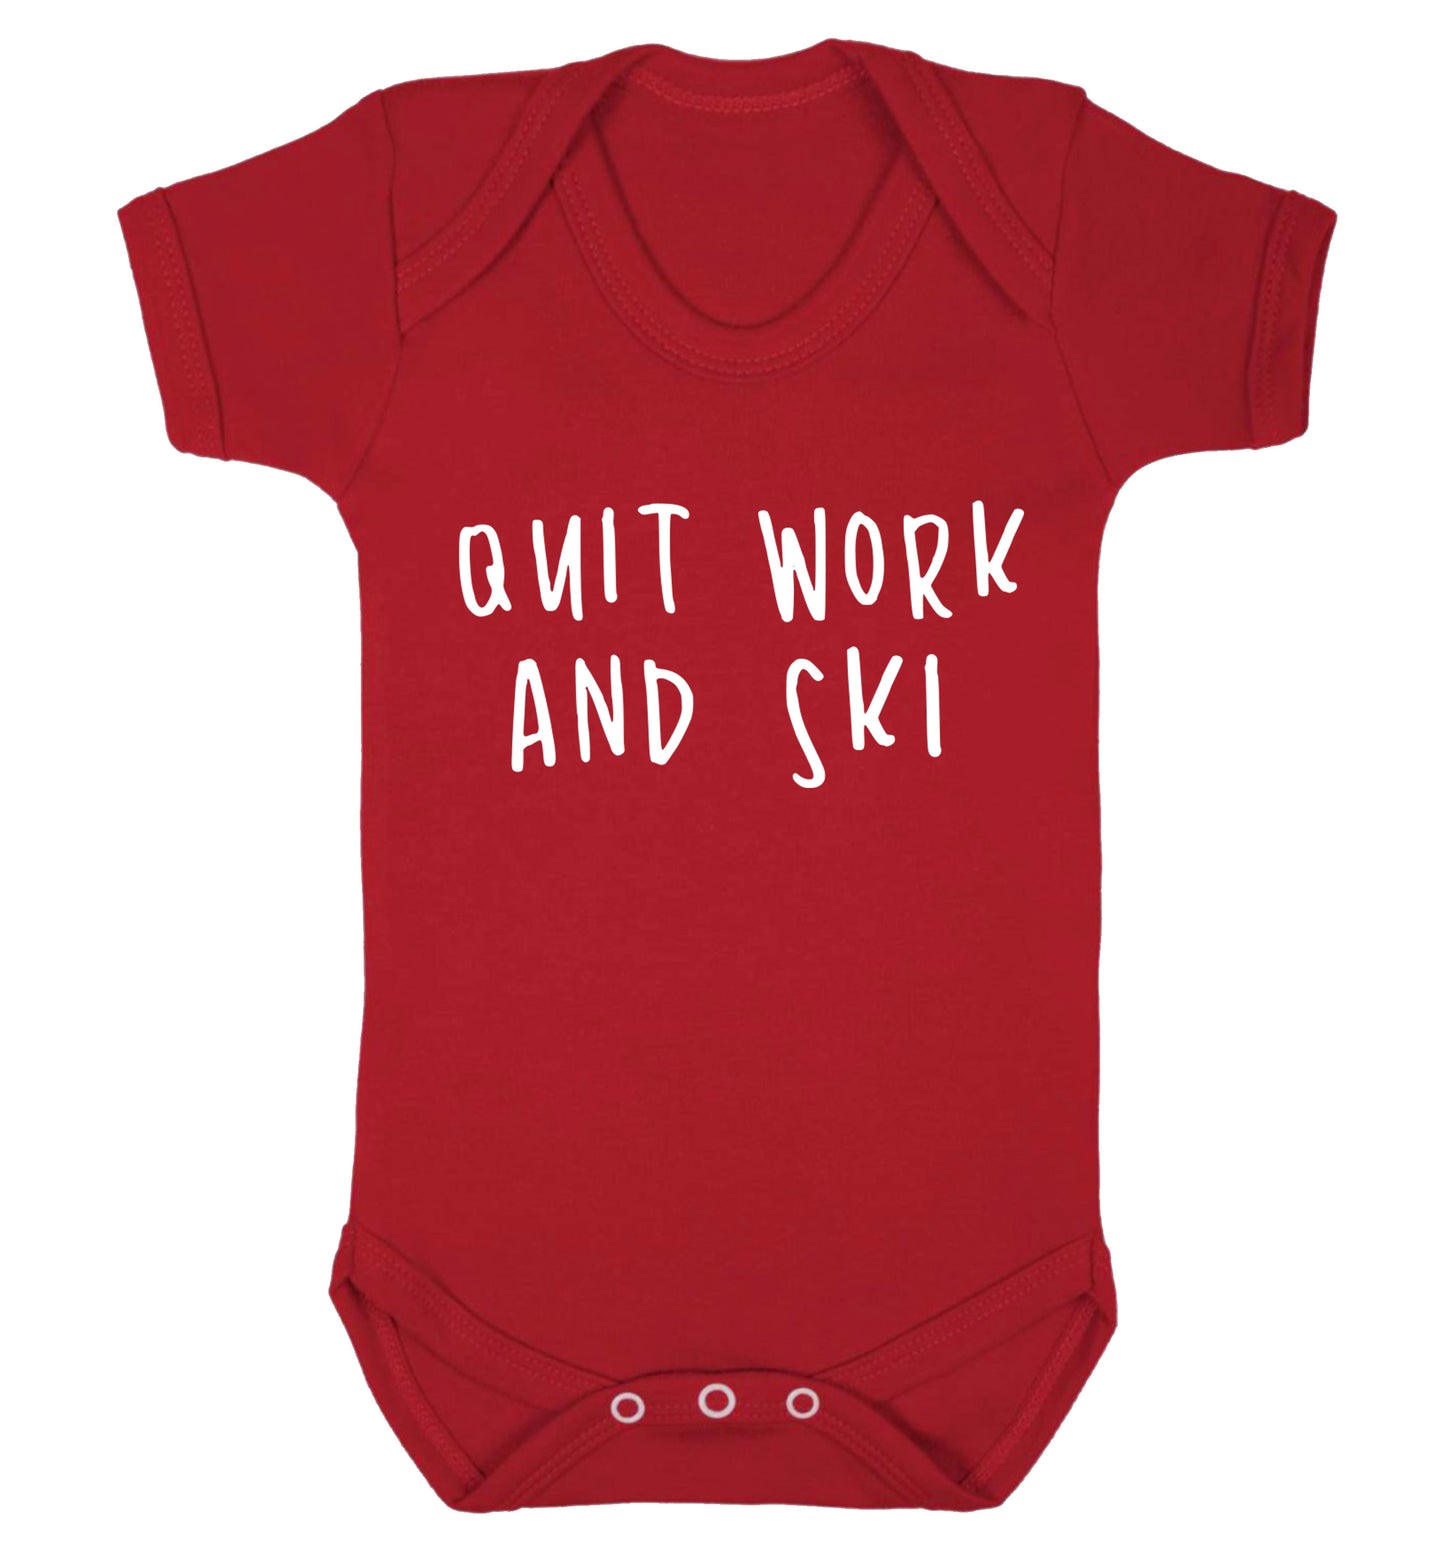 Quit work and ski Baby Vest red 18-24 months